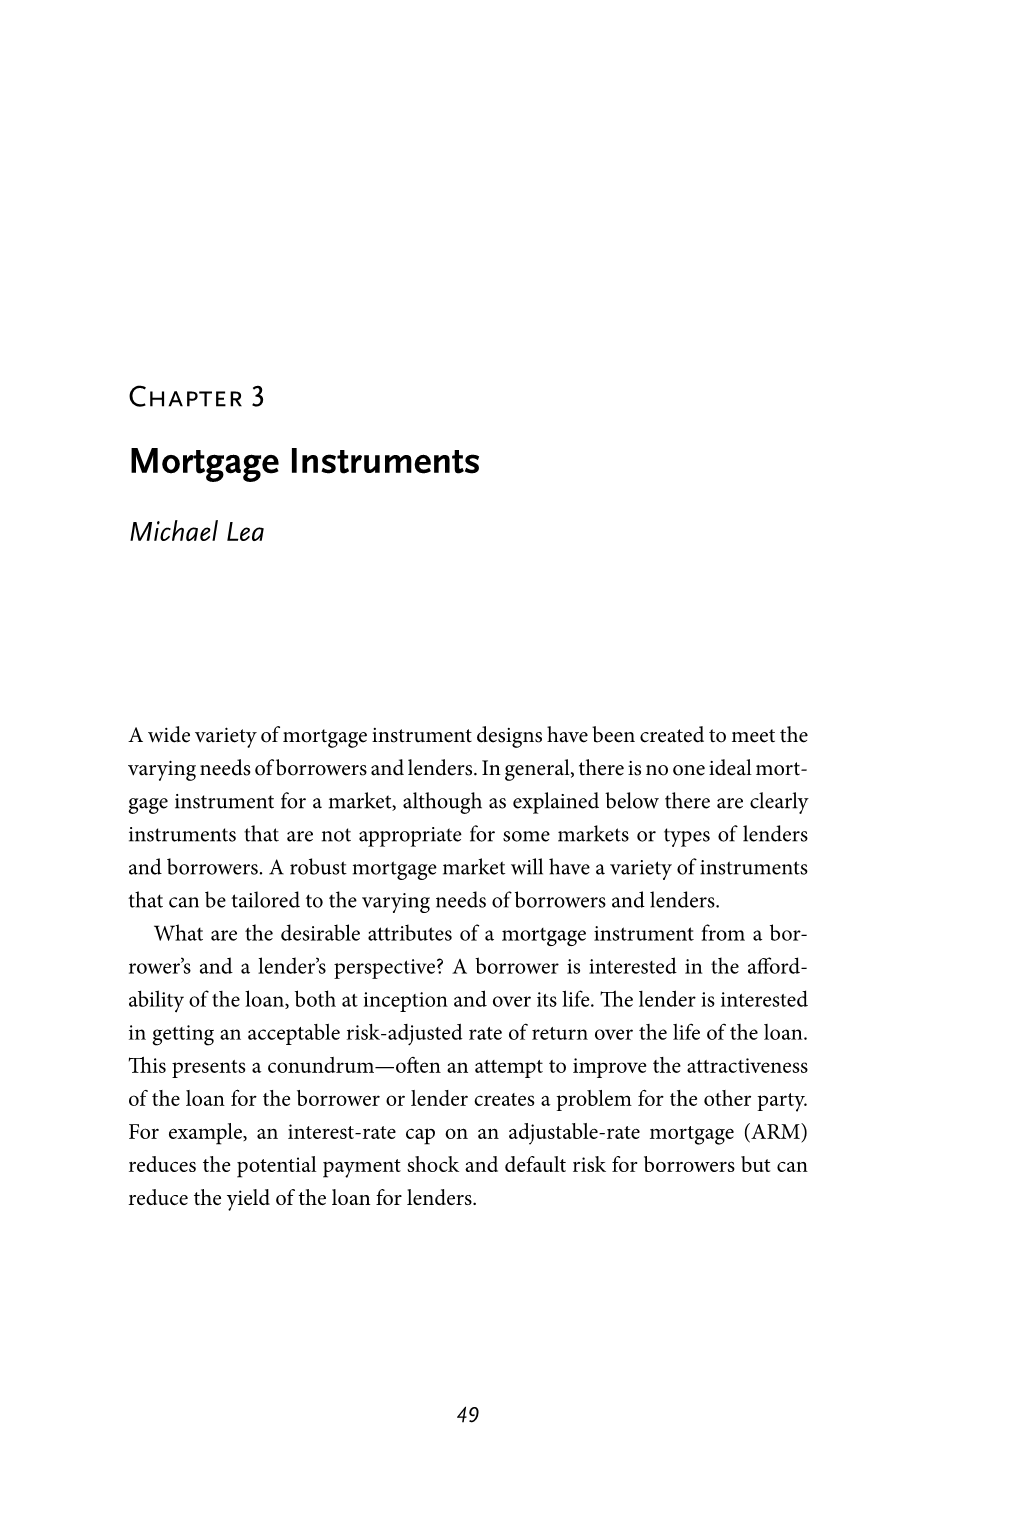 Mortgage Instruments